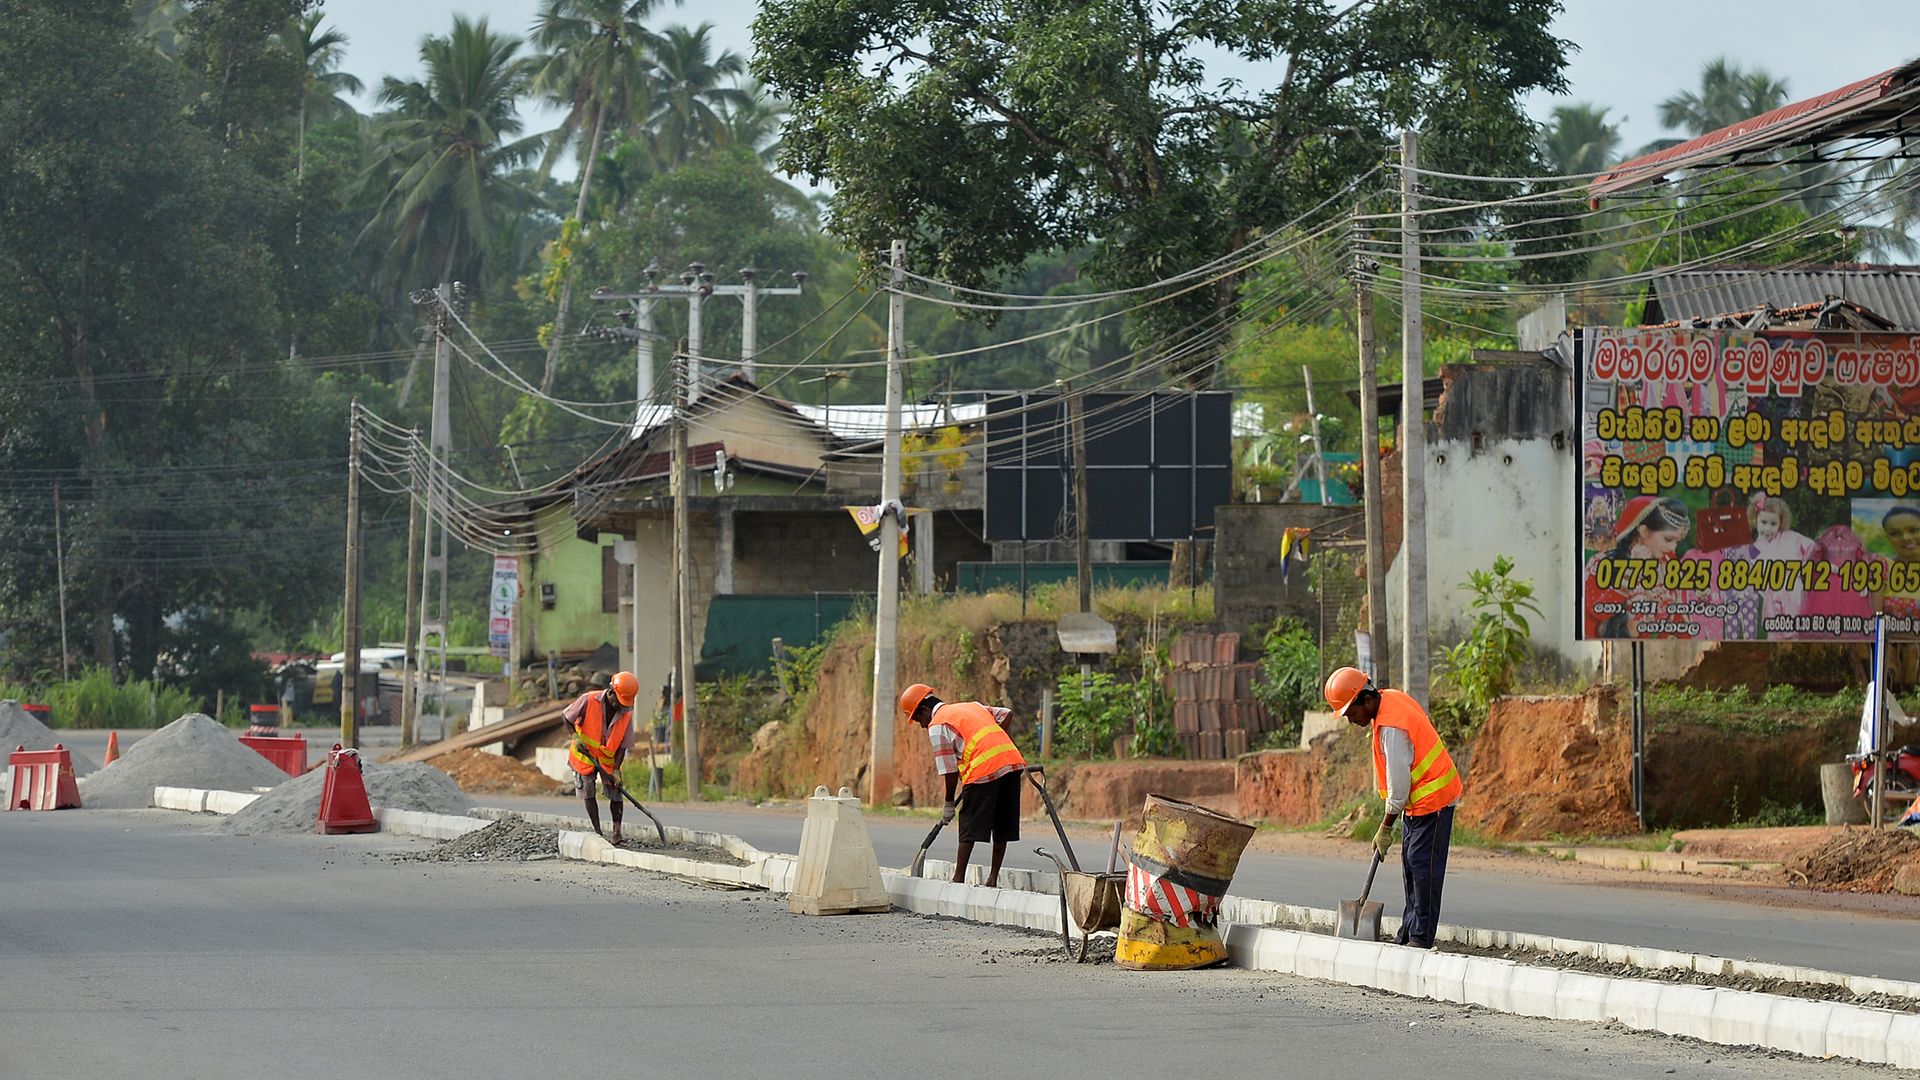 Sri Lankan road construction workers construction labourers works along a road in Colombo on August 5, 2018. 